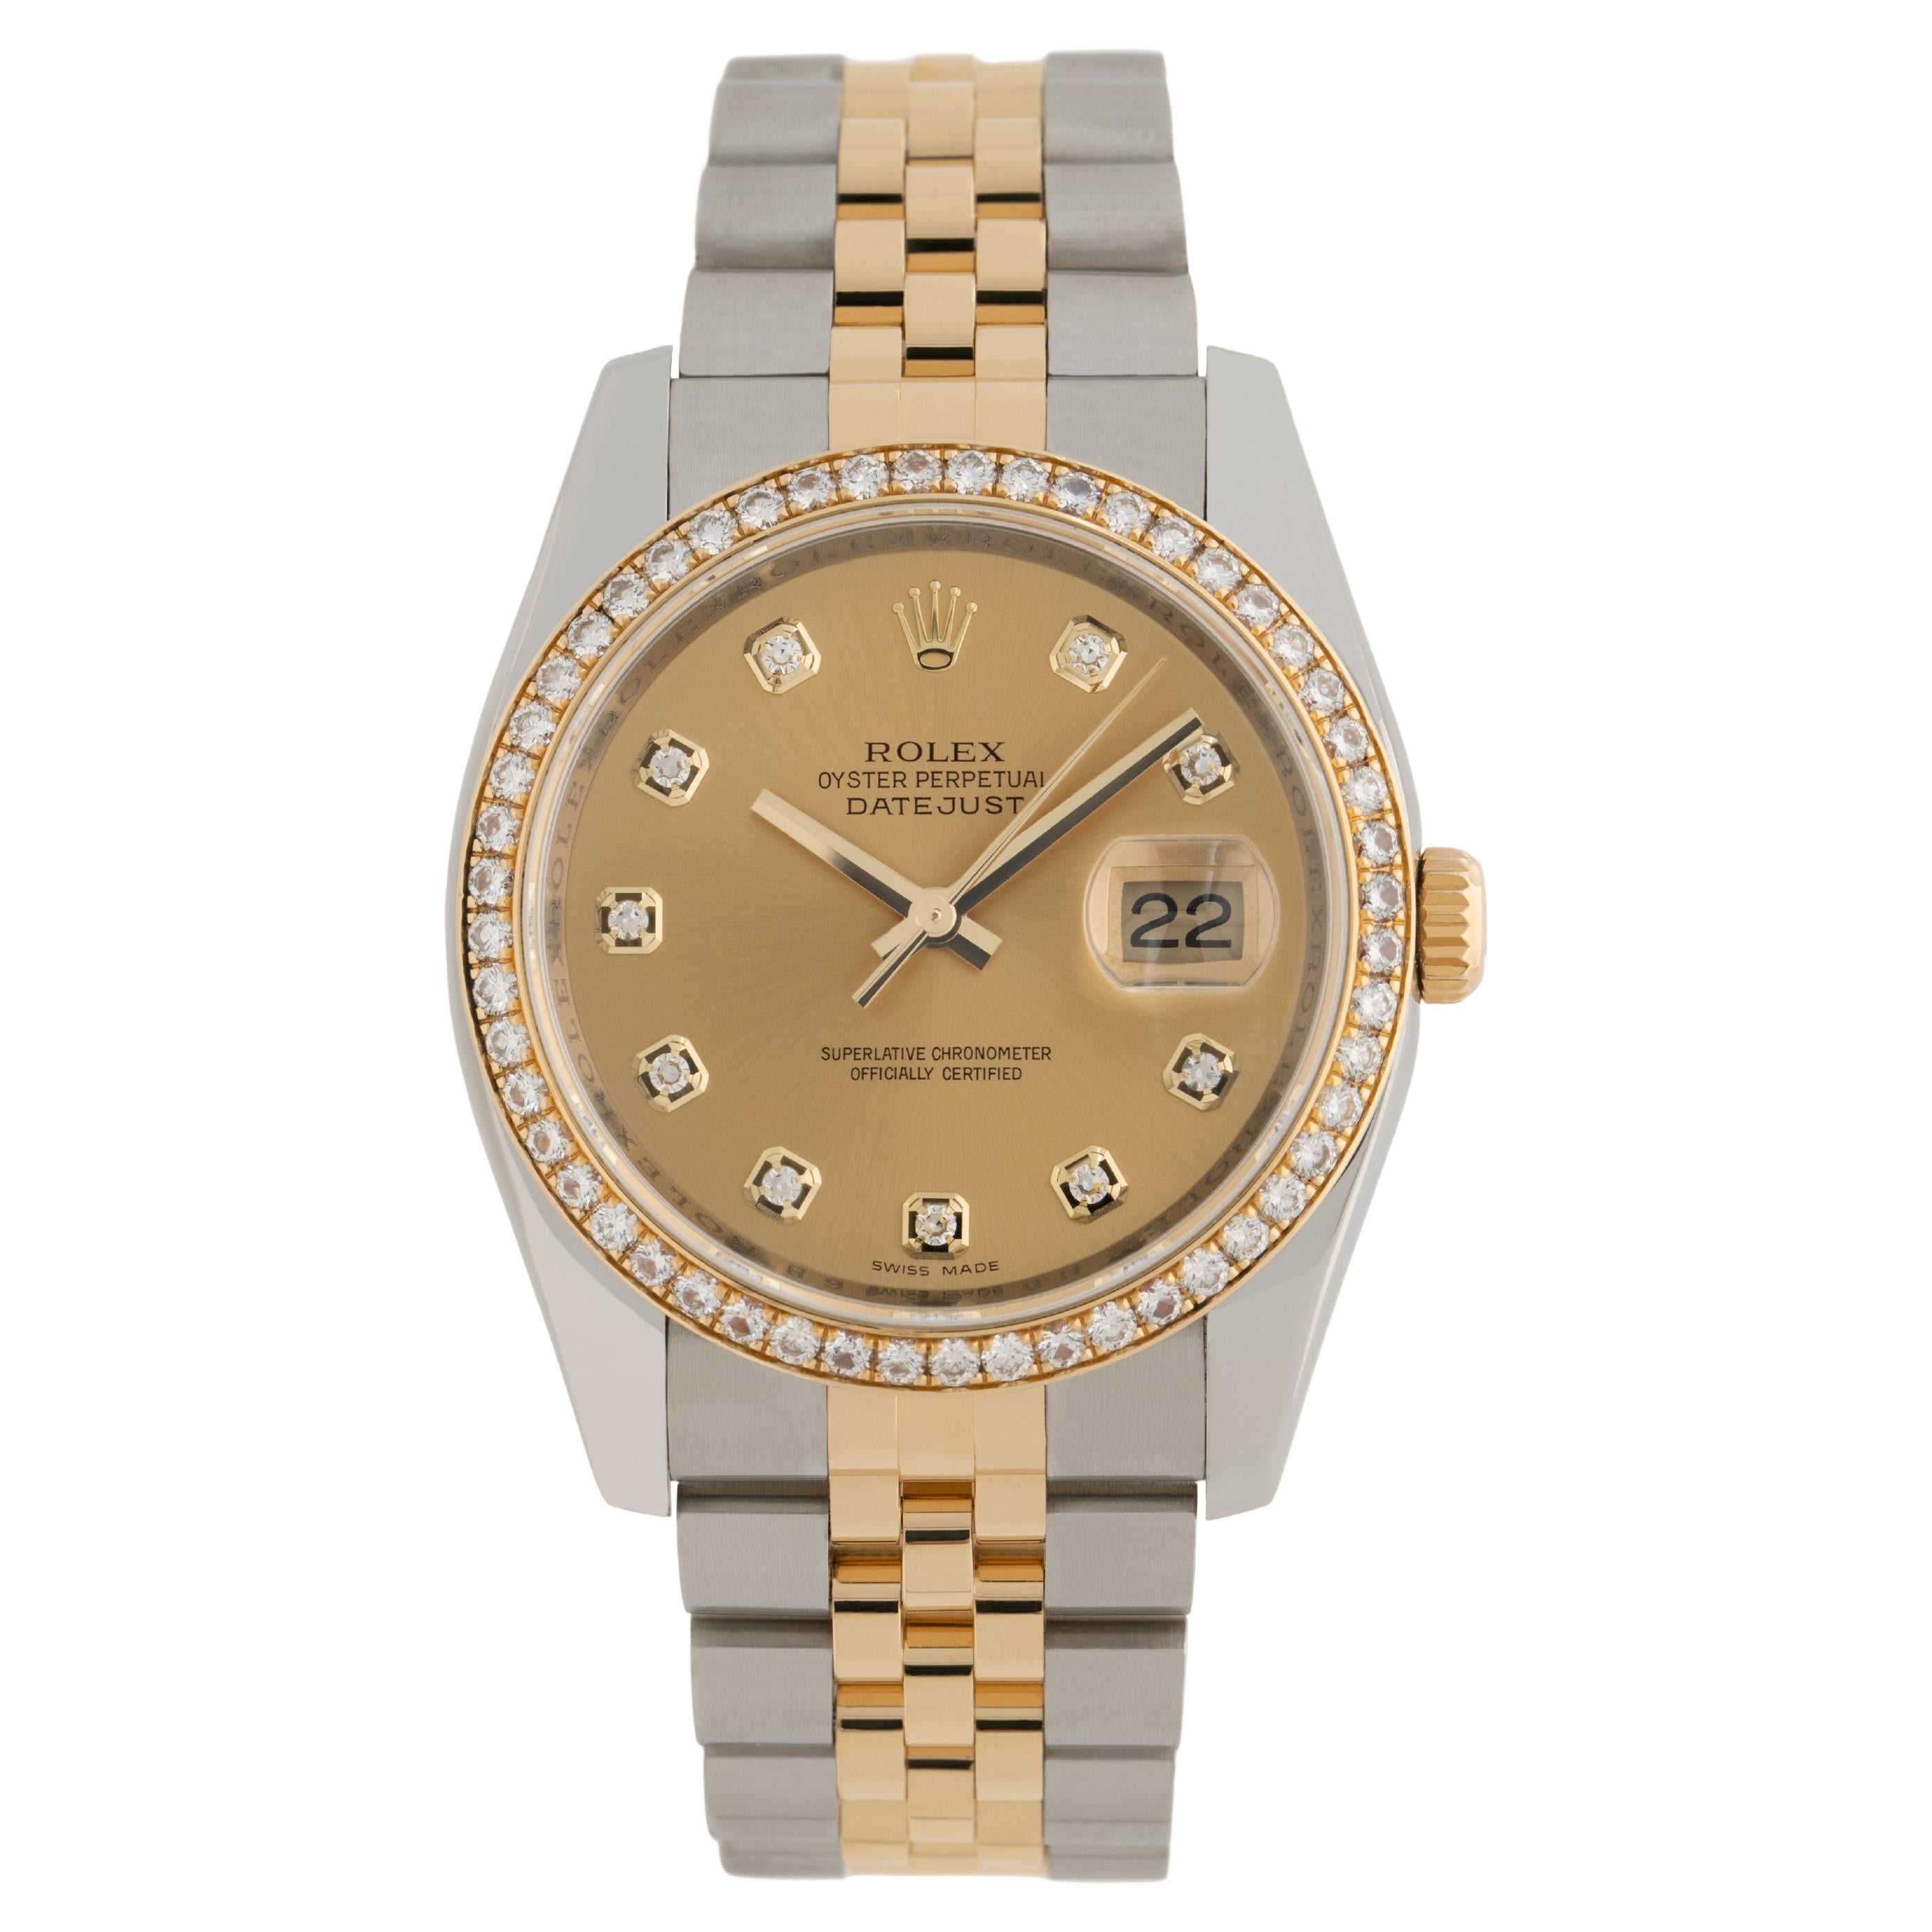 2014 Rolex DateJust Stainless Steel 18K Gold and Diamonds Model 116243 Papers